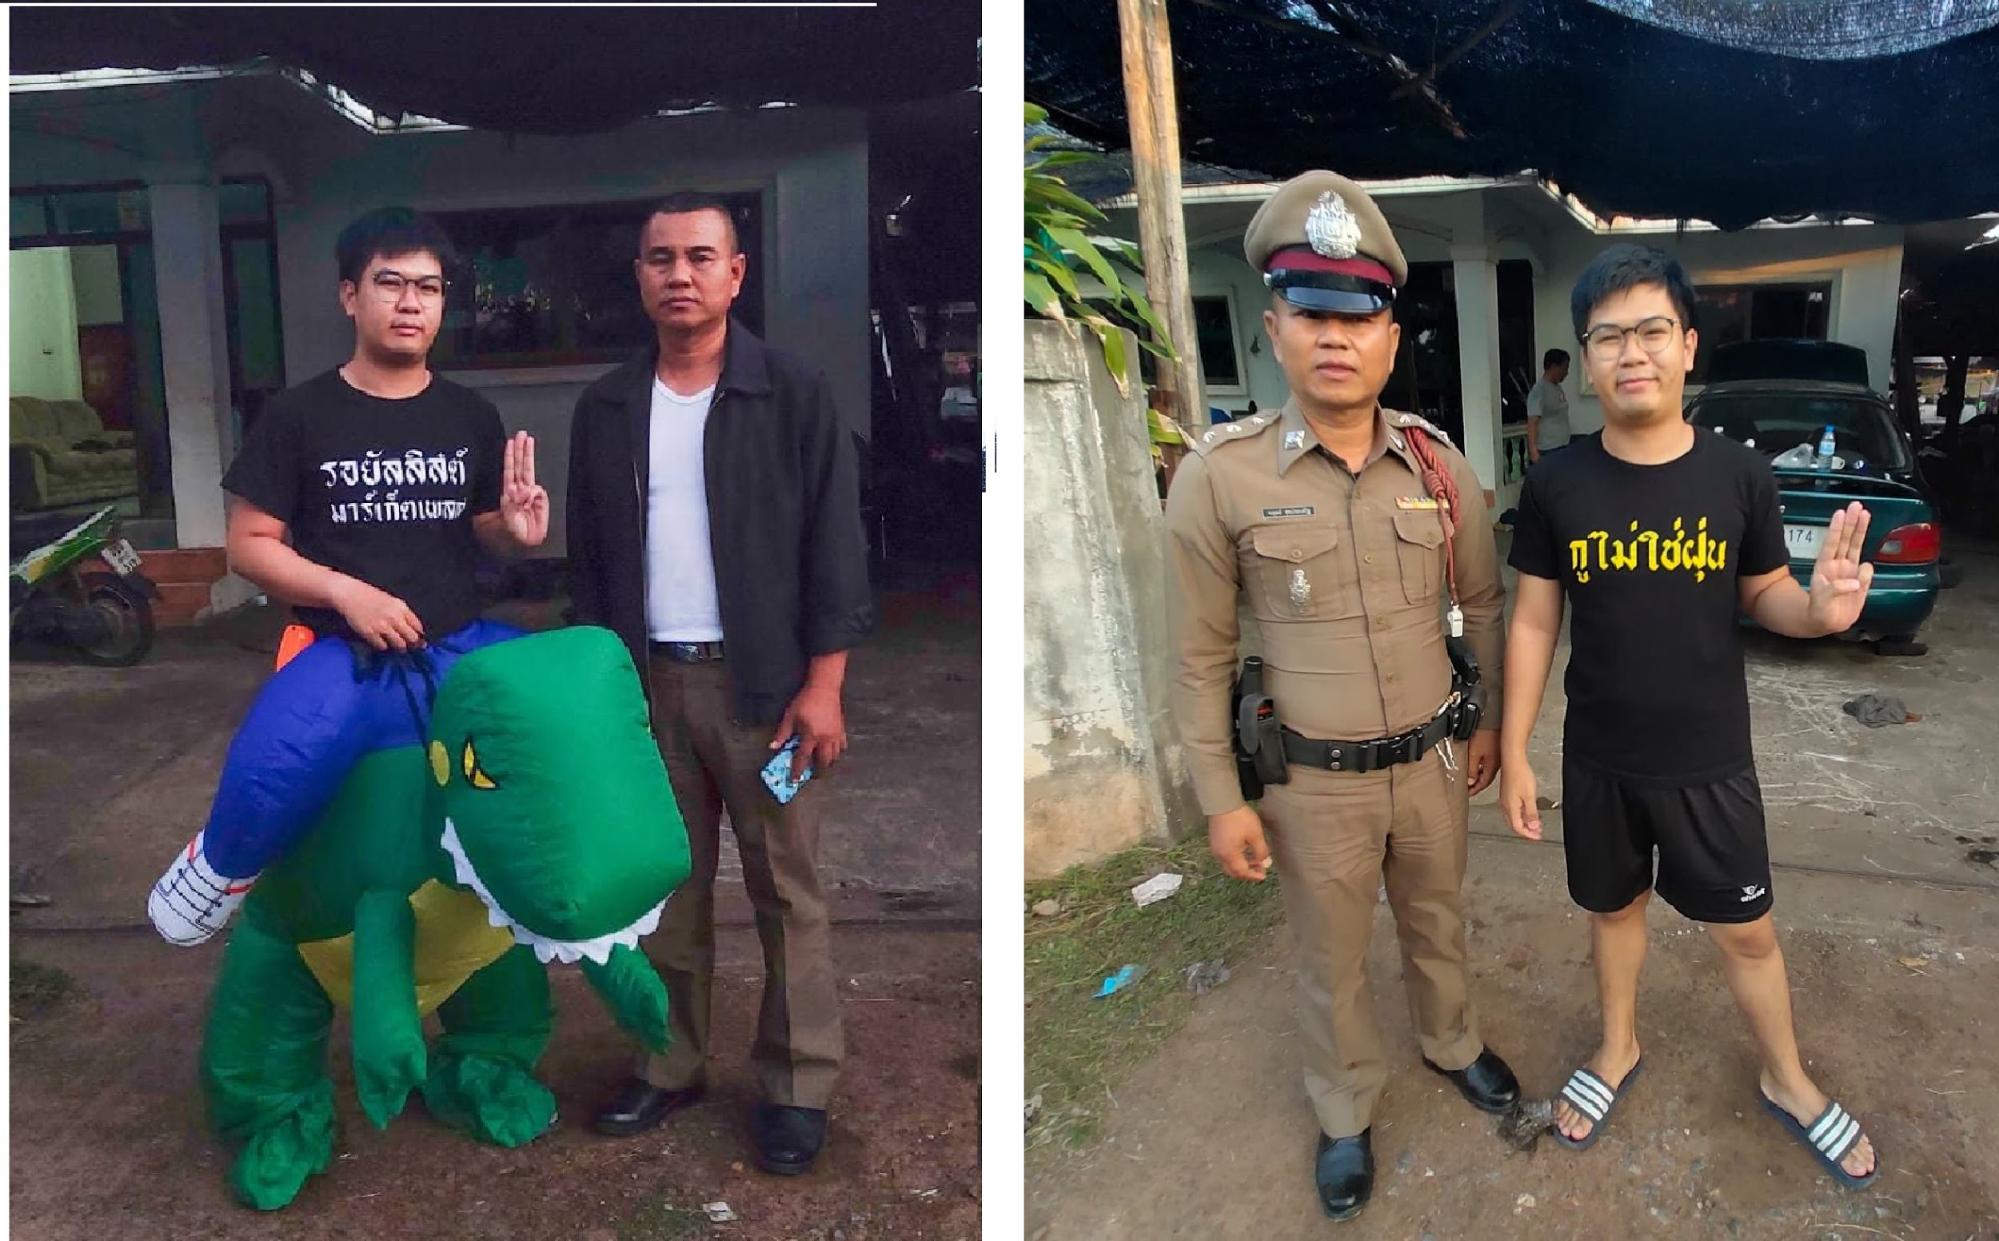 Pachara “Max” Sarntiyakul: “Time is on our side,” as he finds ways to include his police minders in the struggle. The t-shirt on the left says, “Royalist Marketplace.” The one on the right says, “I am not dust,” an indirect reference to personal pronoun used by commoners when addressing the king, “Dust under His Royal Foot.” Source: Pachara Sarntiyakul
